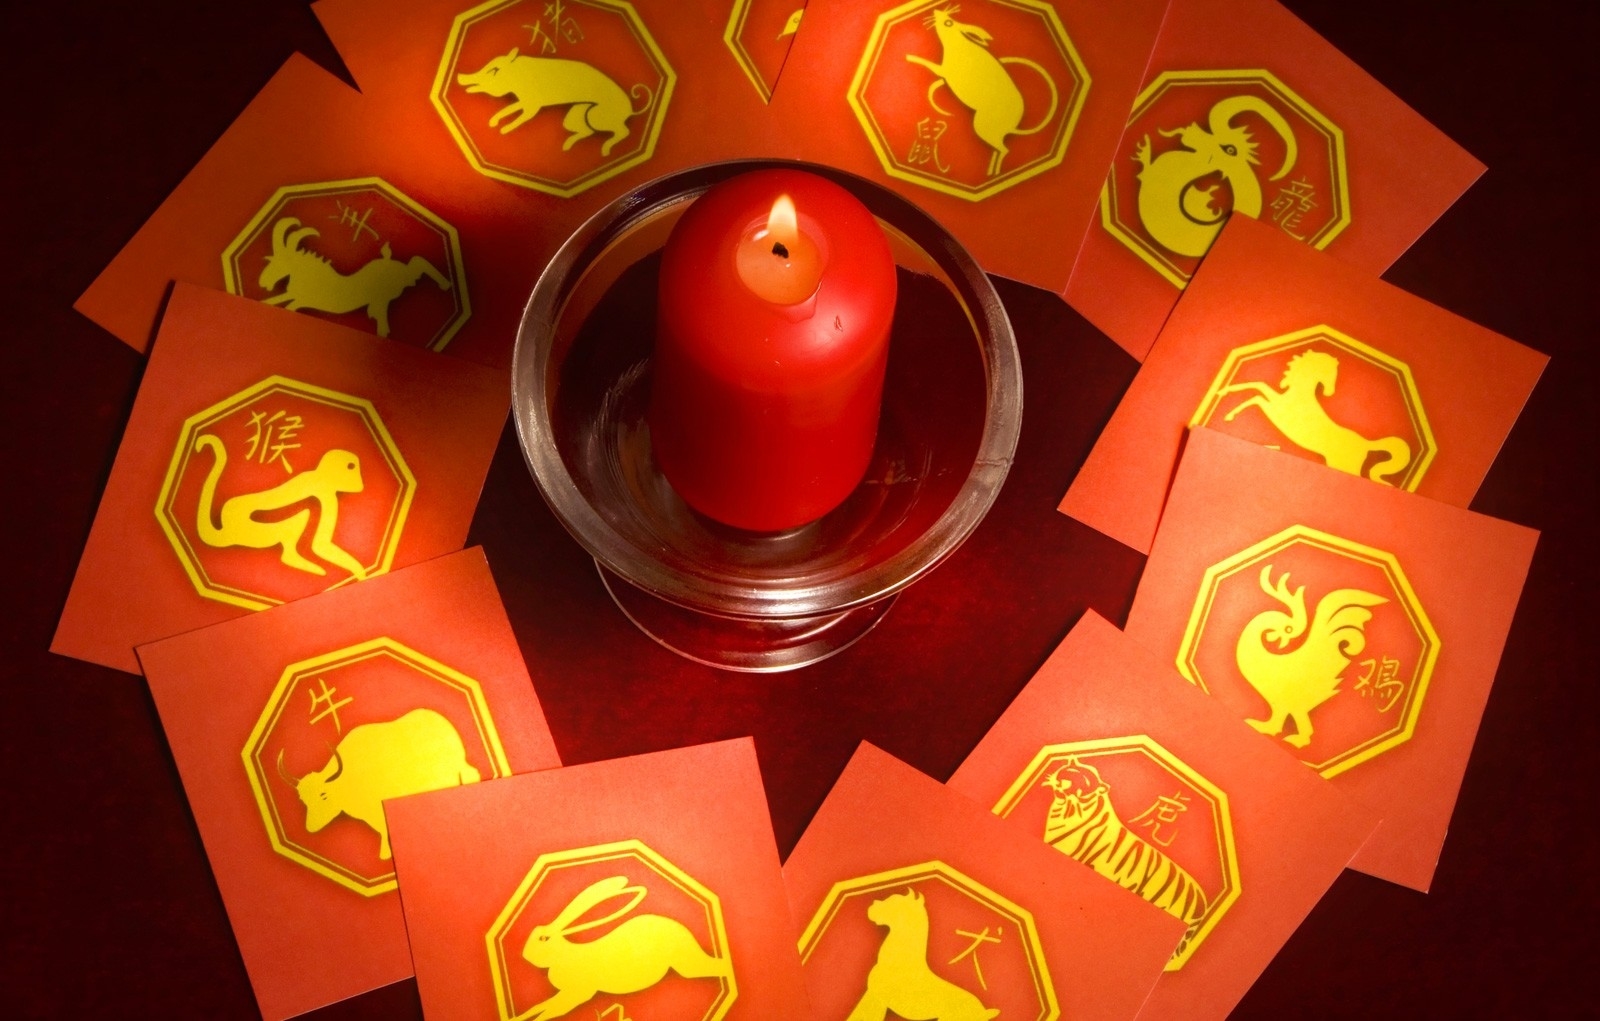 Chinese Zodiac Signs And Meanings On Whats-Your-Sign Chinese Zodiac Signs And Meanings Years 1900 To Present